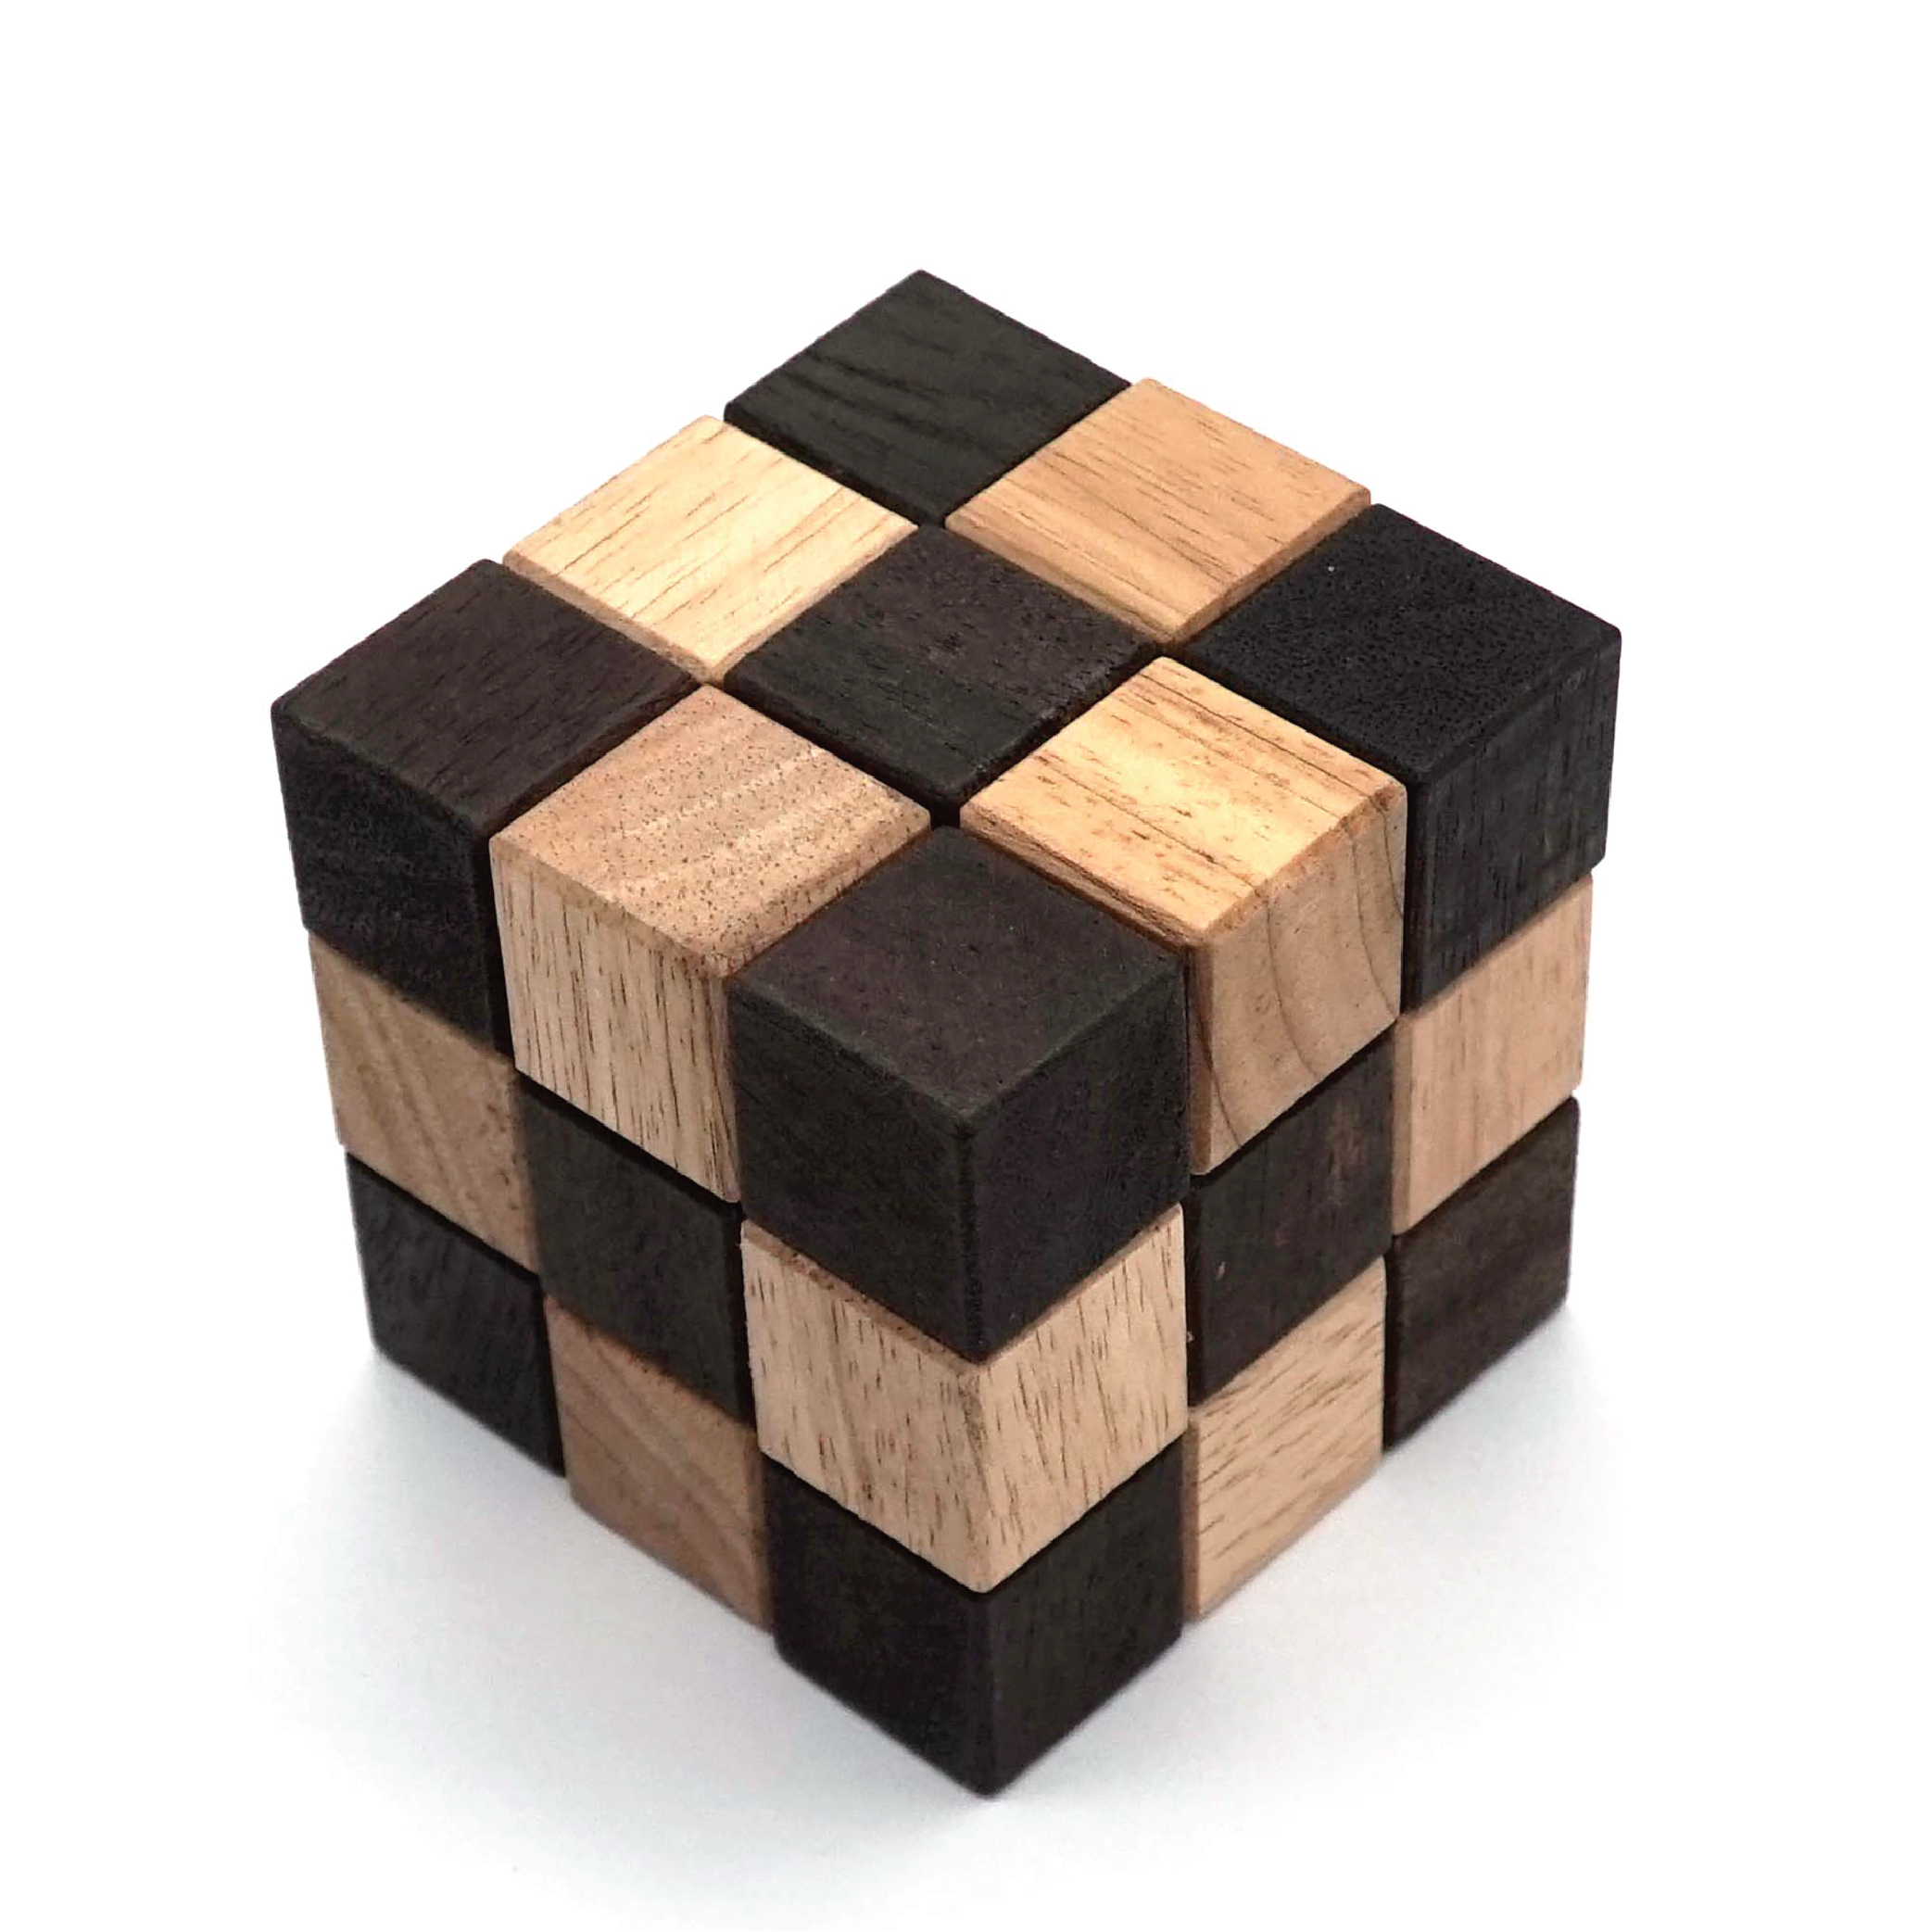 cubic game